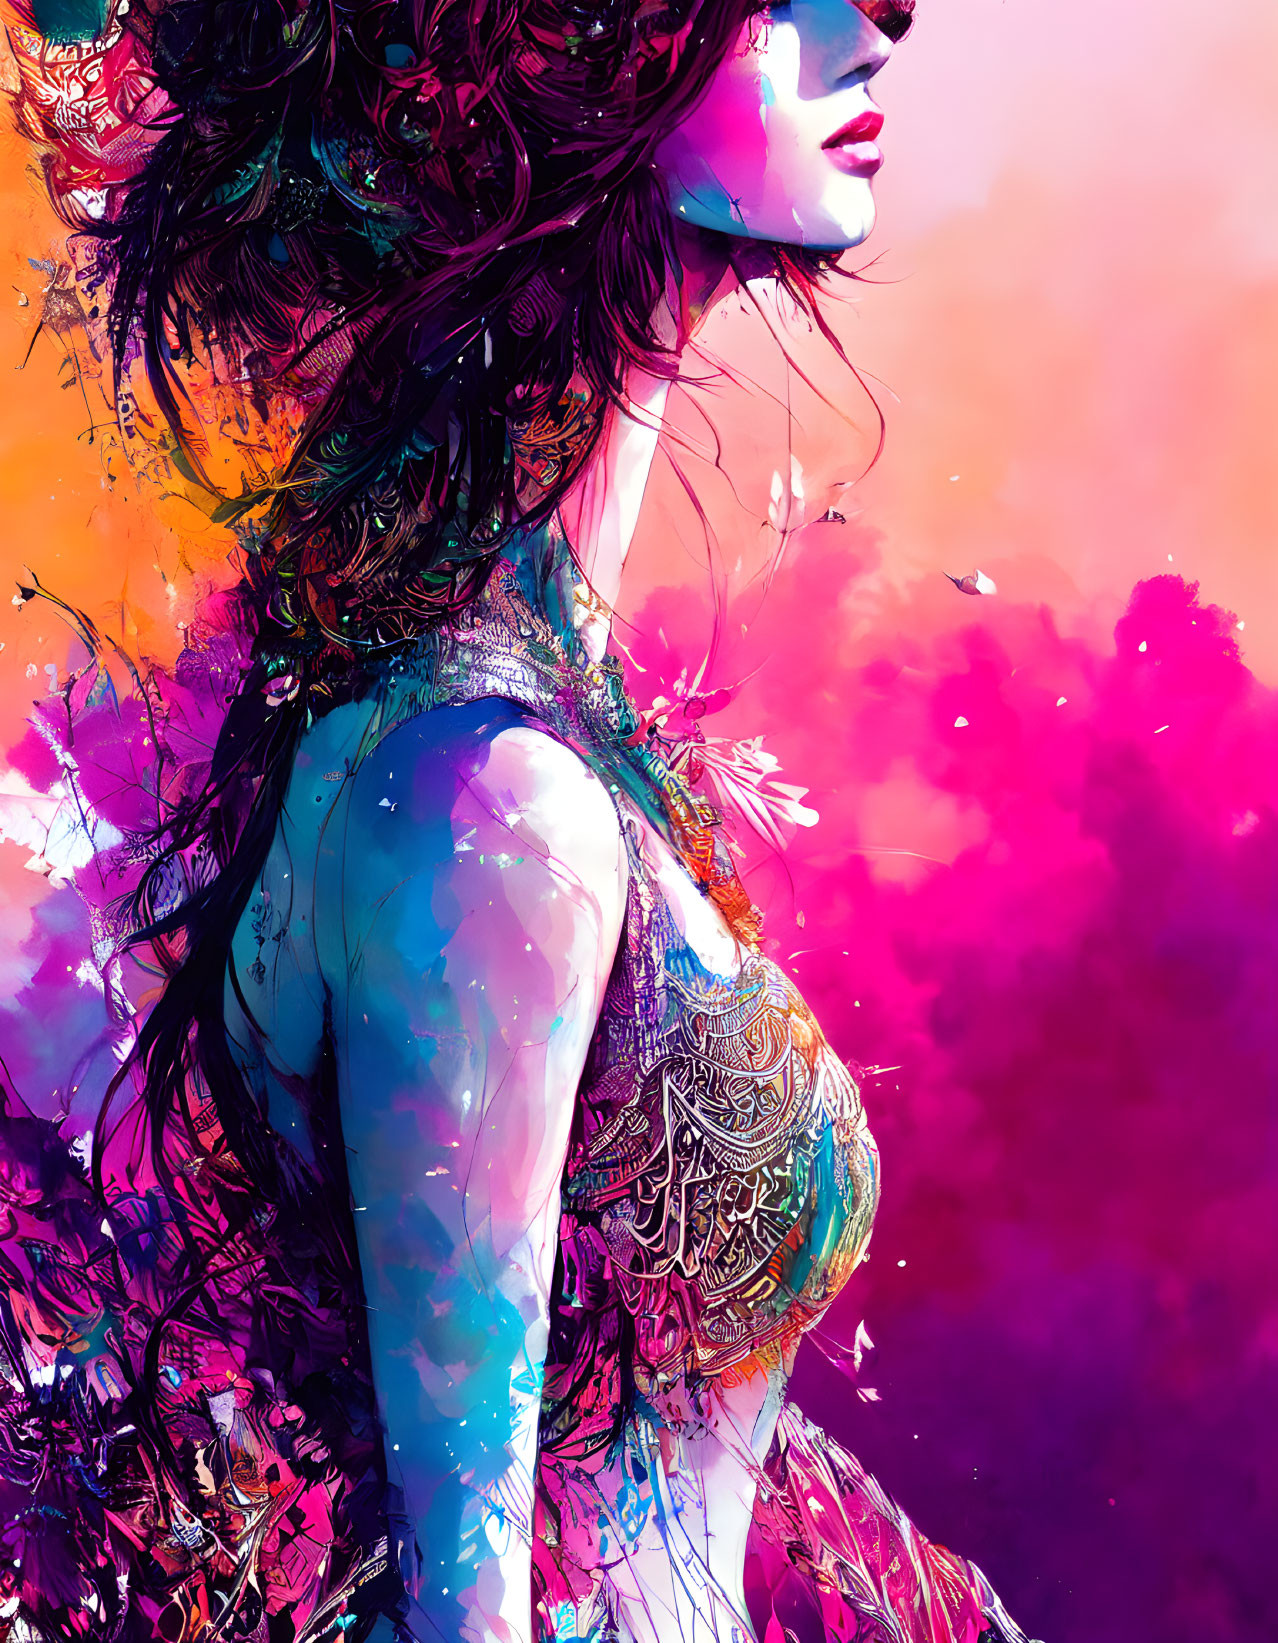 Colorful Digital Artwork: Woman in Profile with Abstract Elements